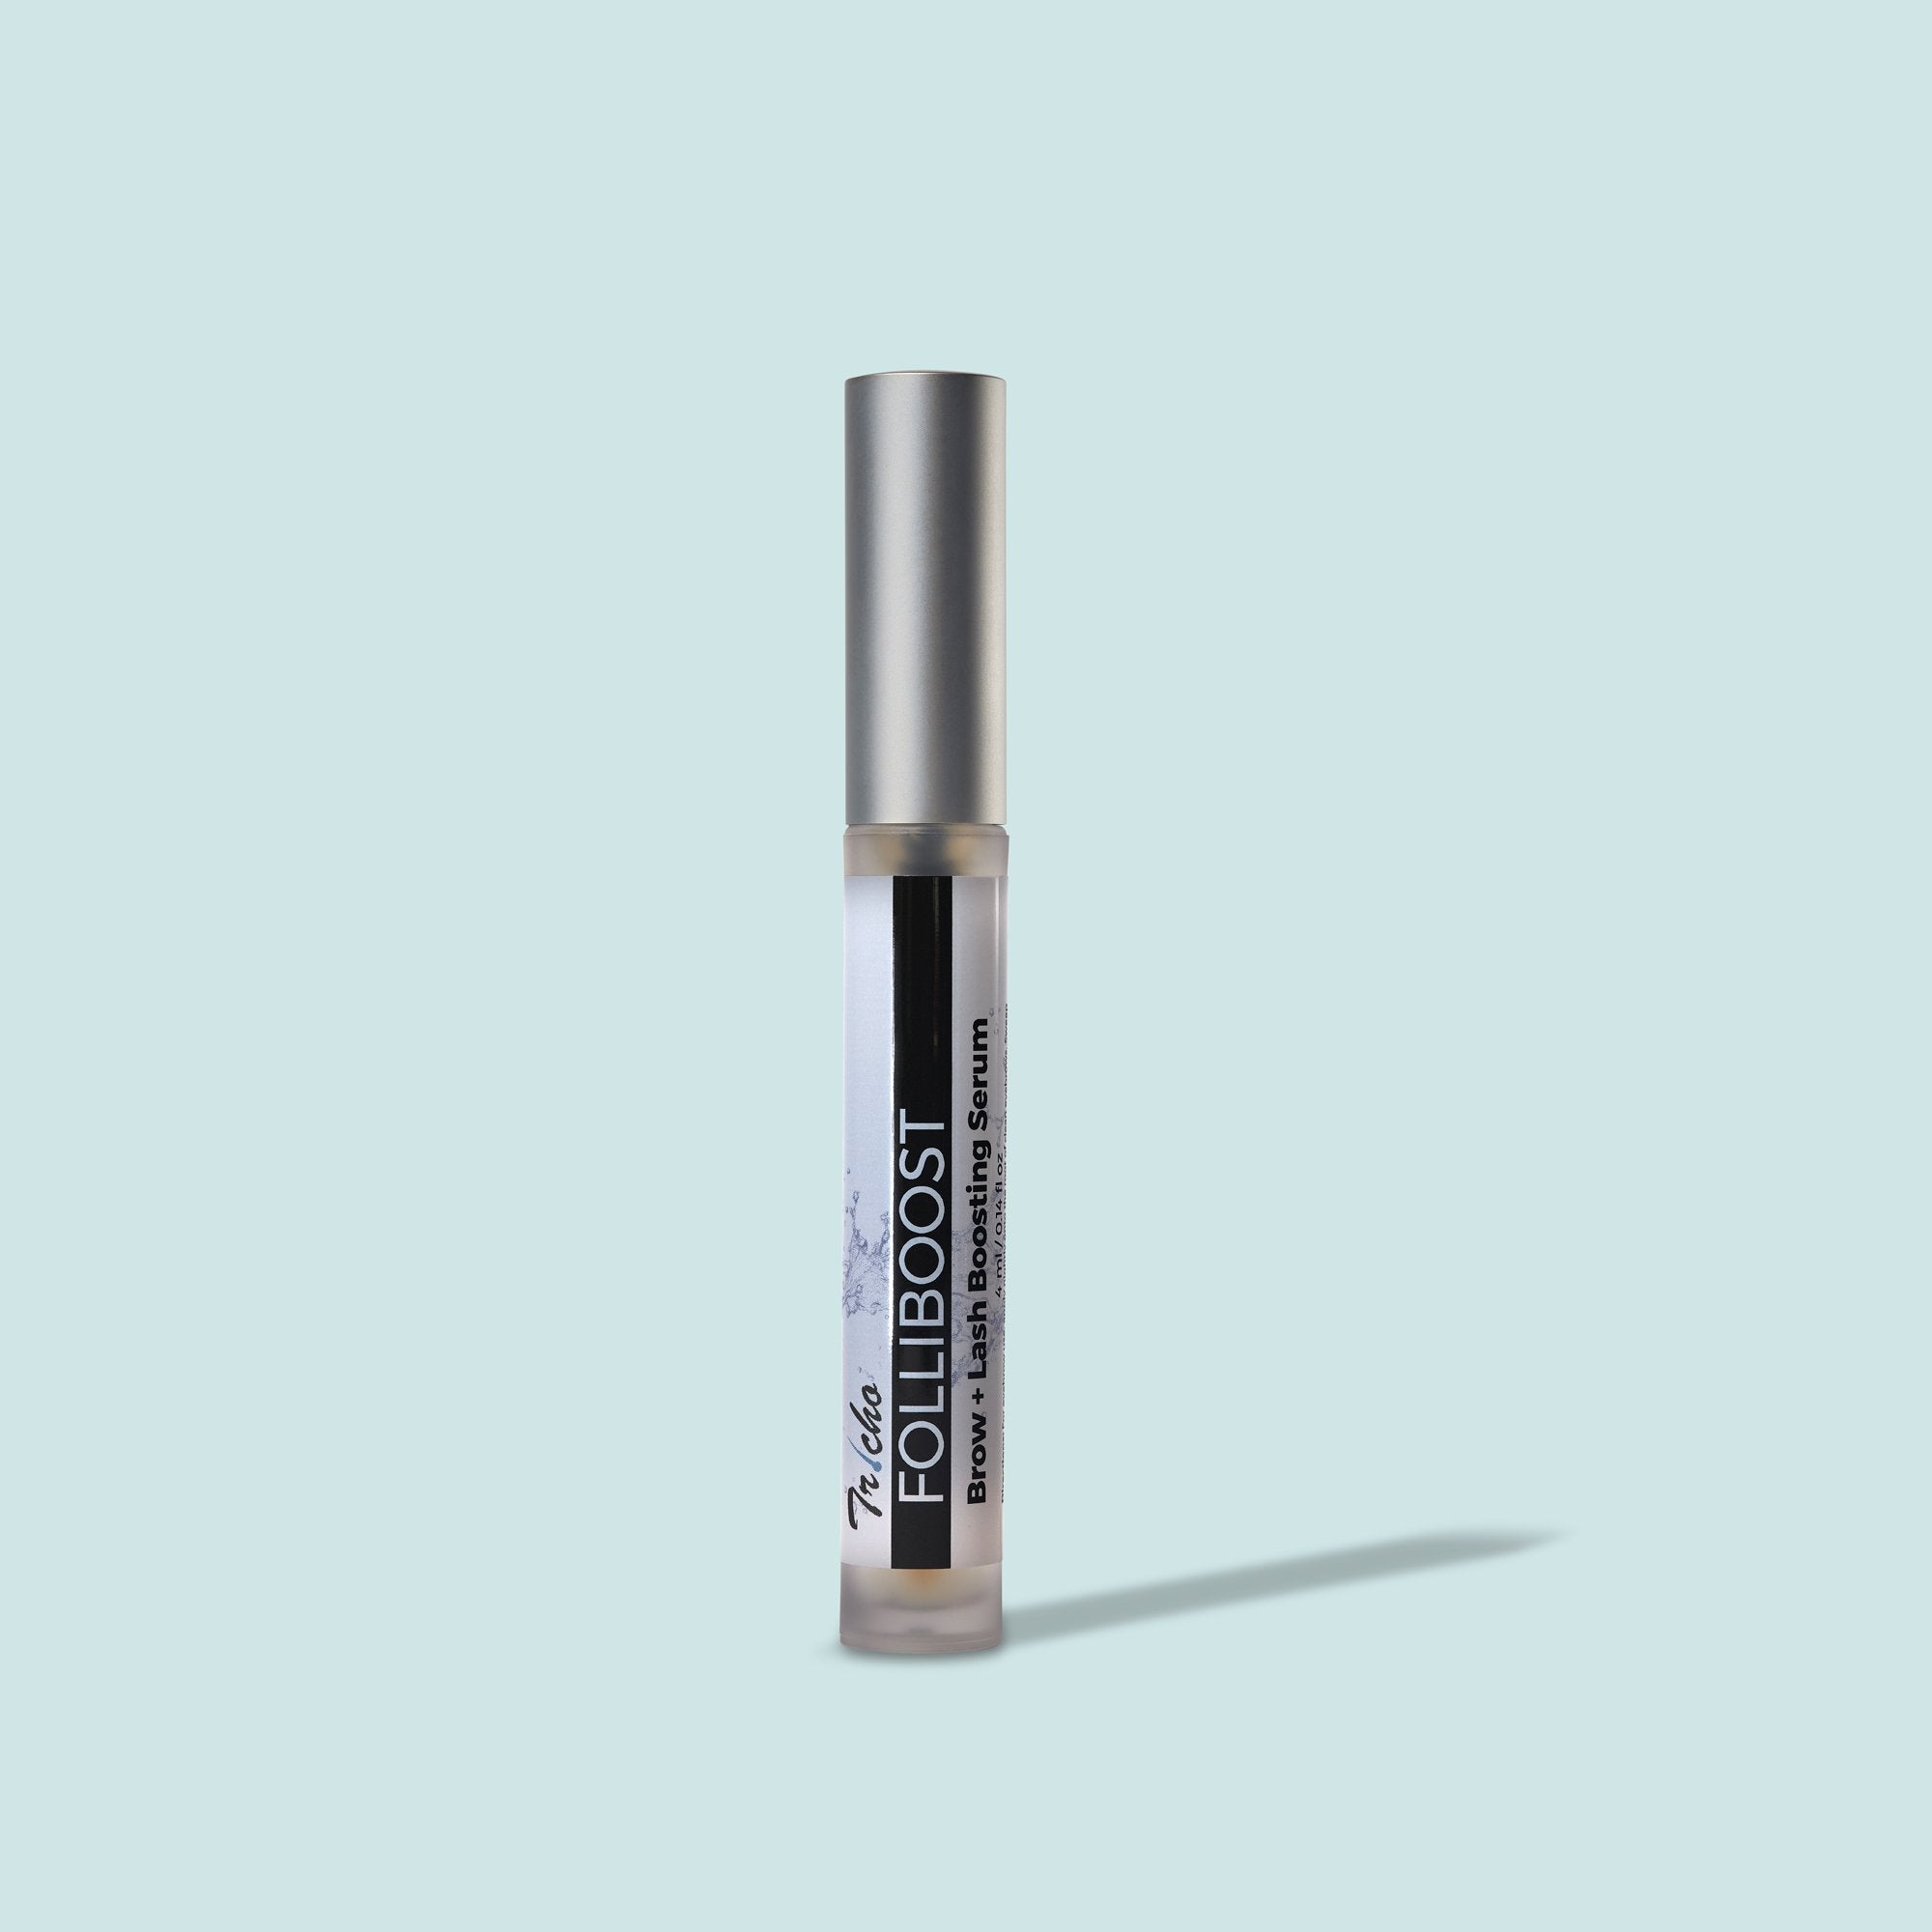 1 Bottle Subscription of Folliboost Lash + Brow Booster